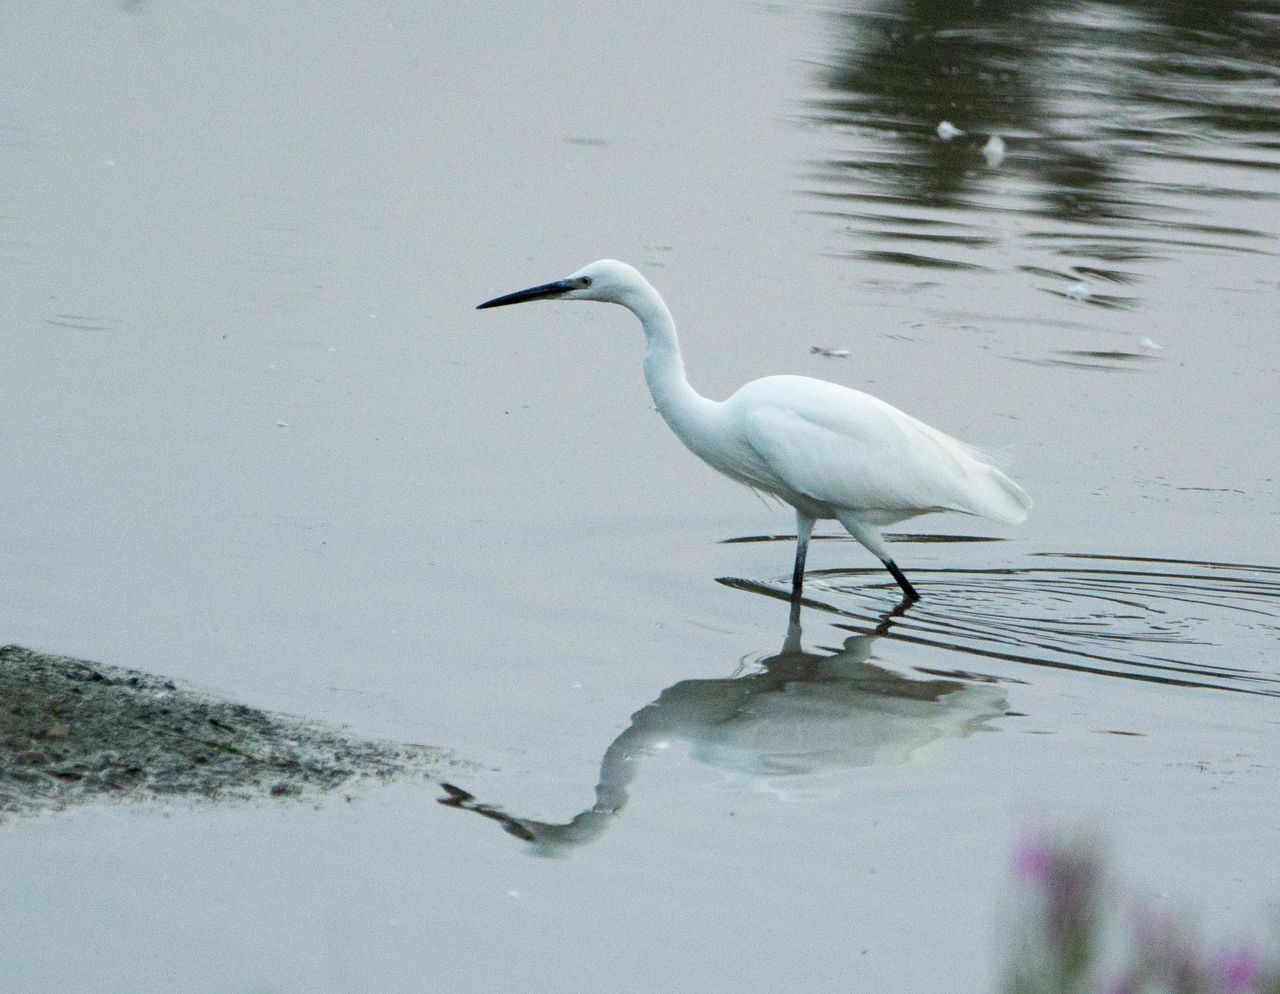 SIDE VIEW OF BIRD IN WATER